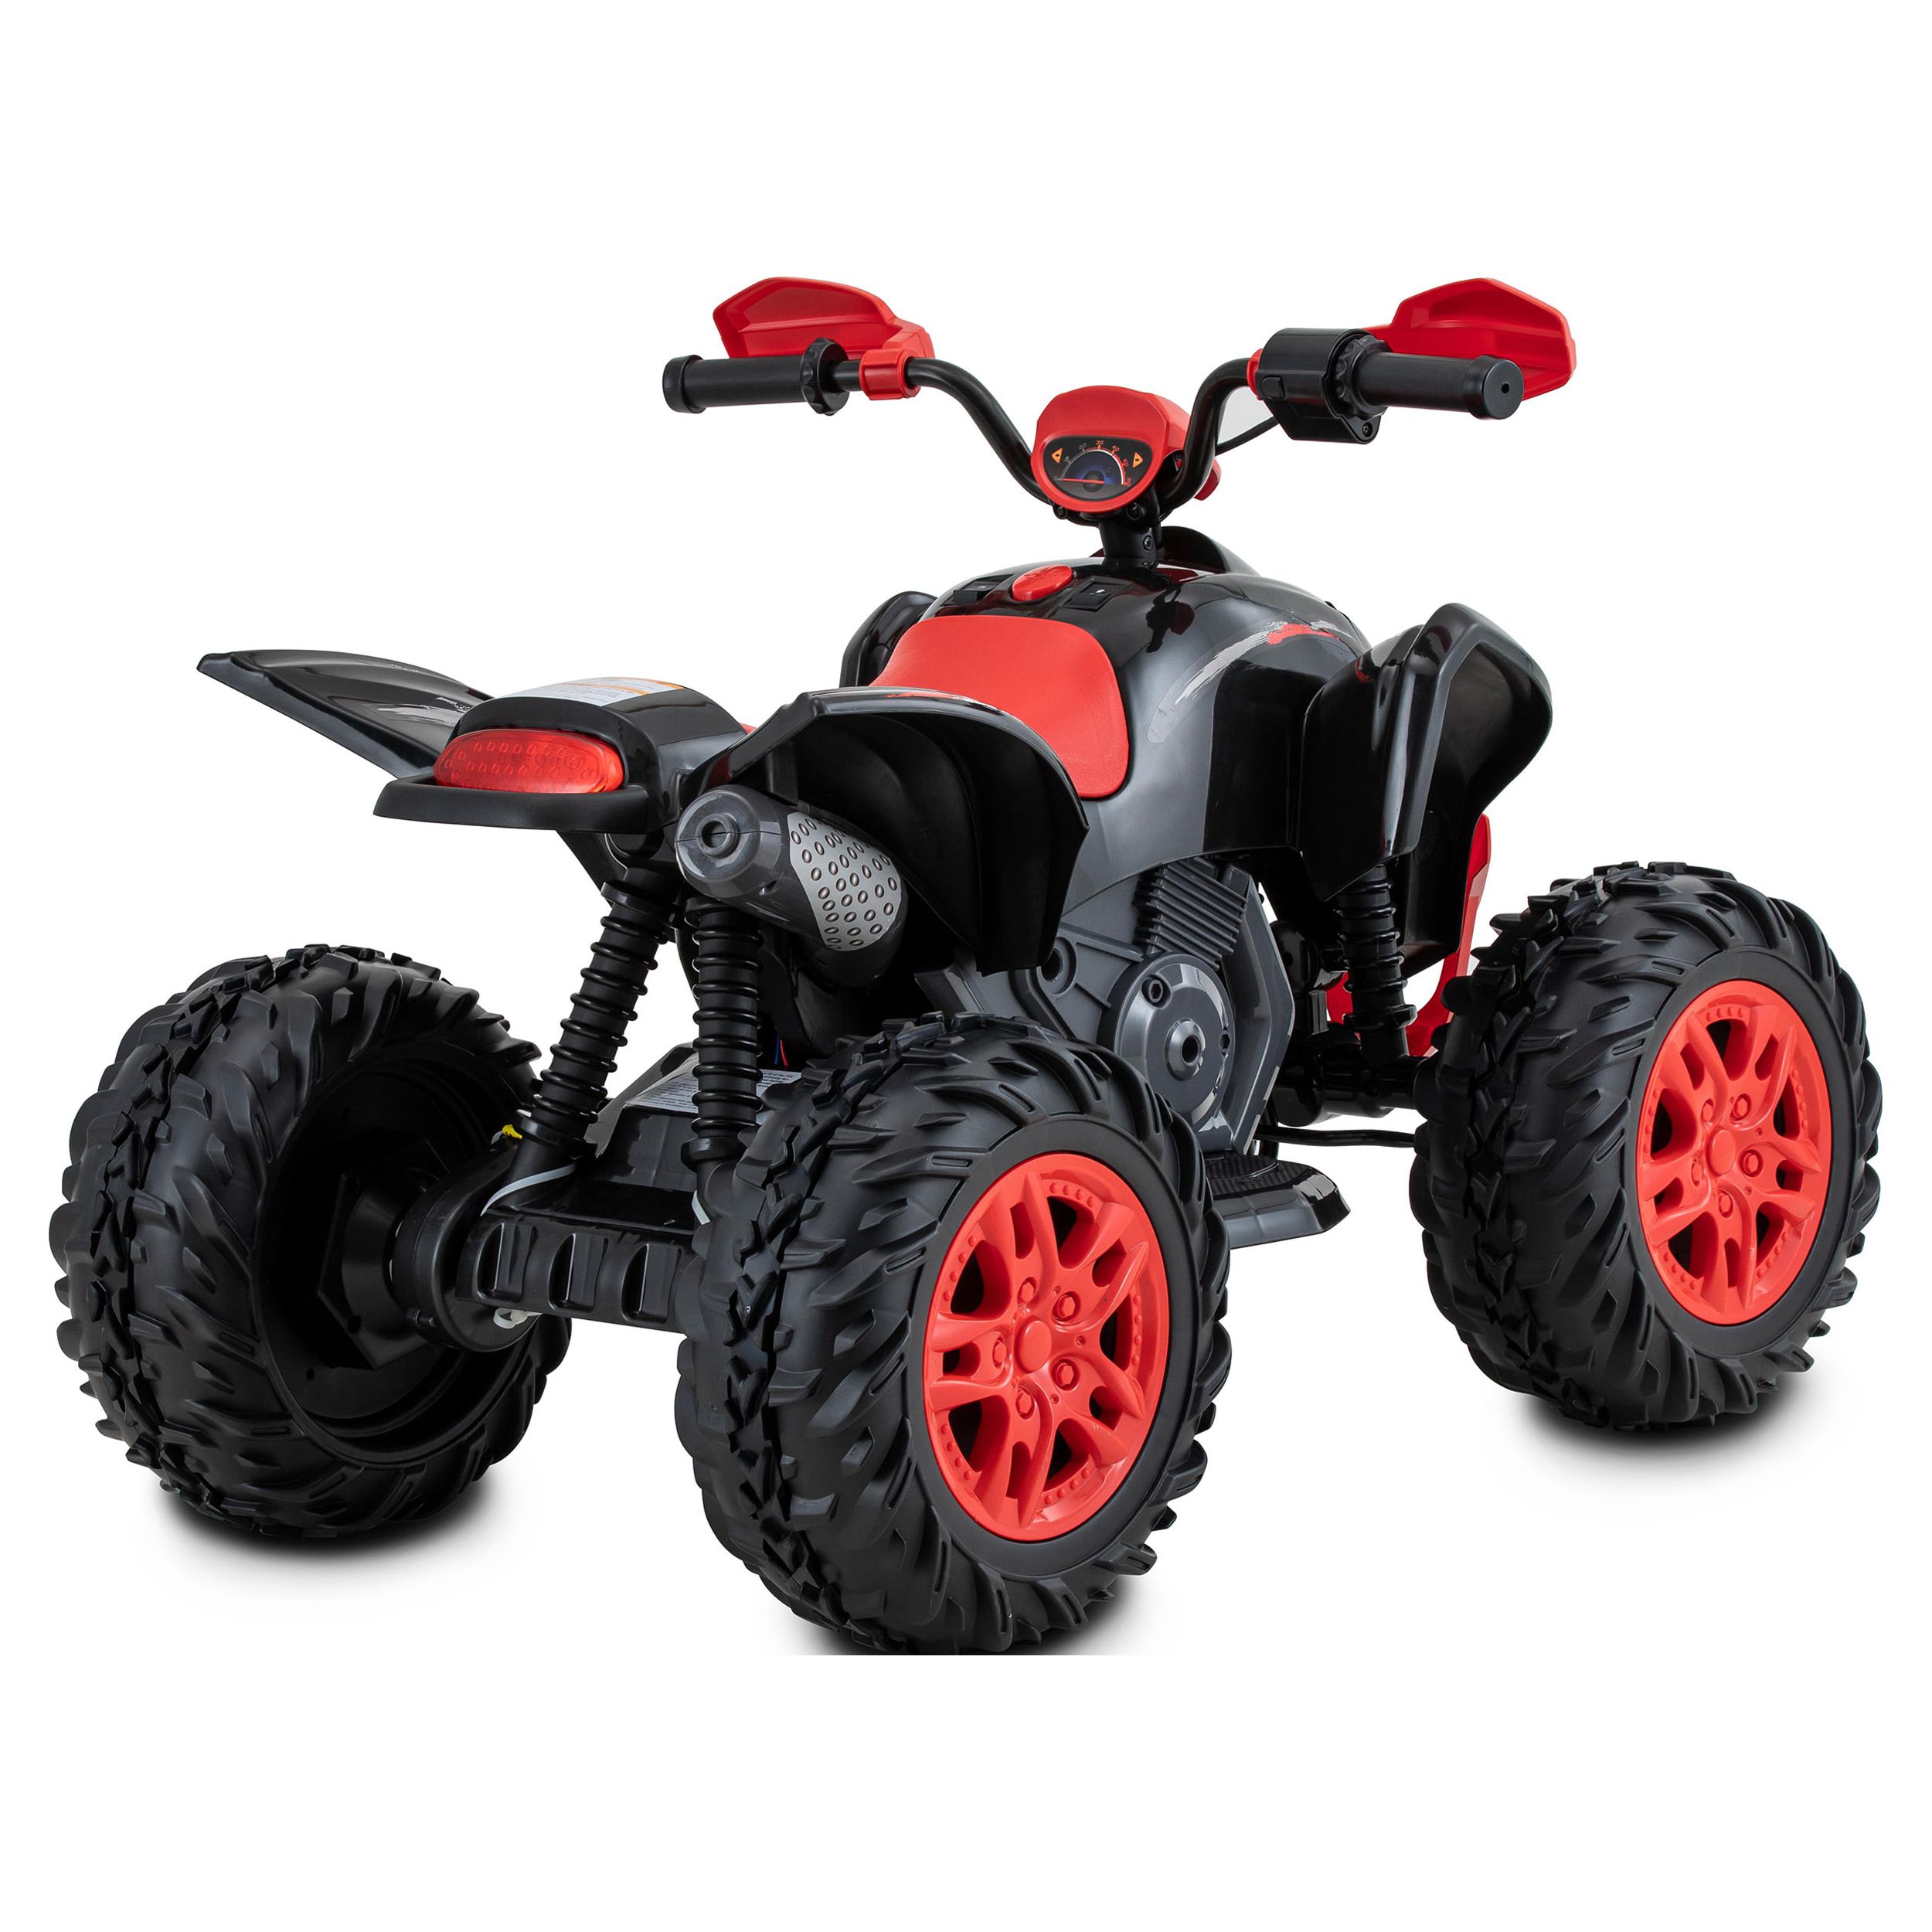 Powersport ATV MAX 12-Volt Battery Ride-On (Red / Black) - image 2 of 9